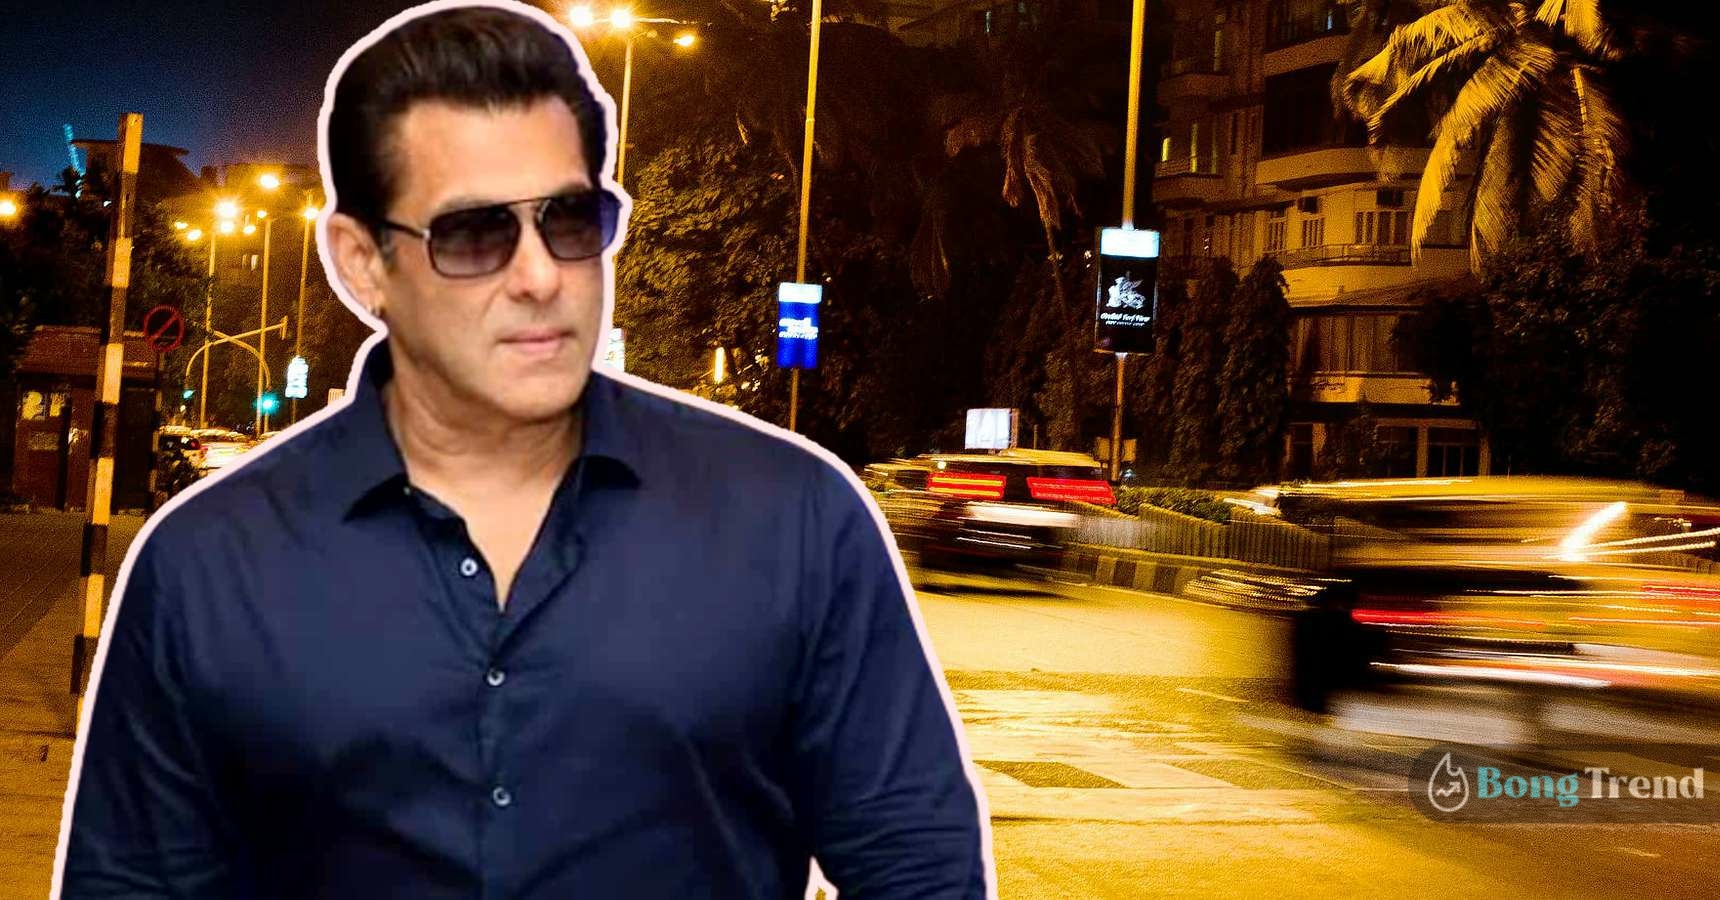 Salman Khan goes out to give food to hungry roadside peoples at night